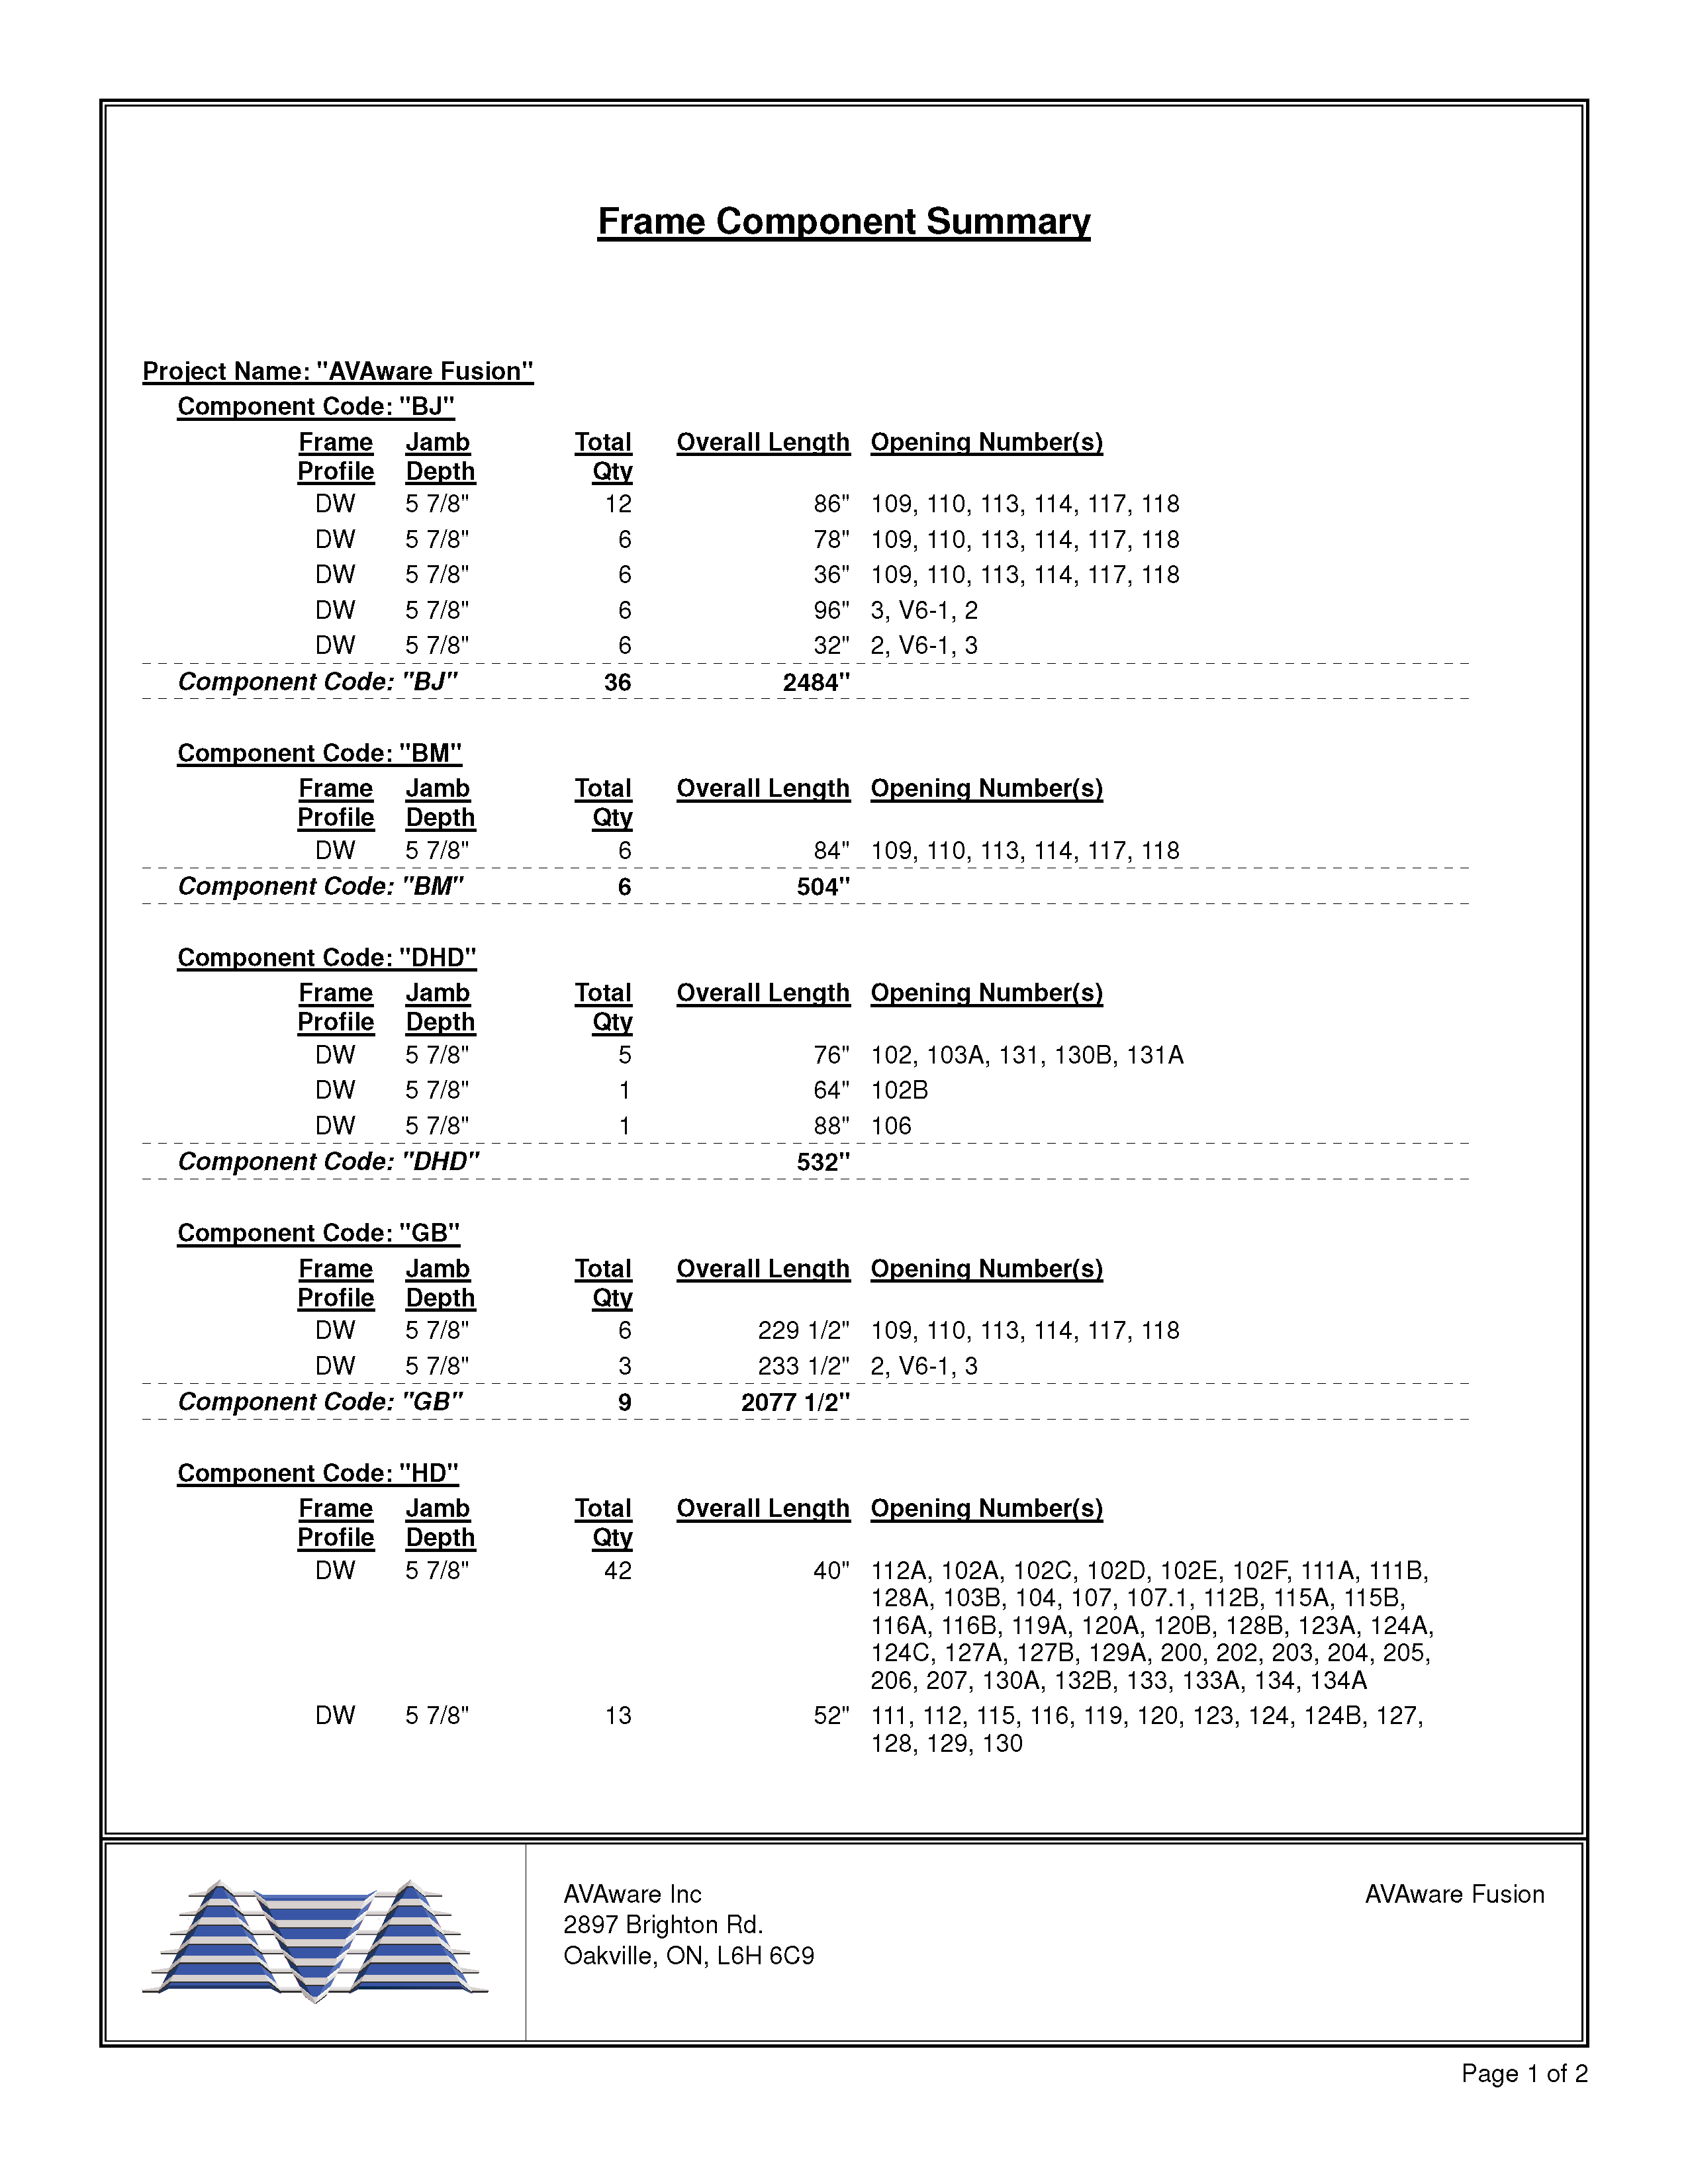 Frame Component Summary Page 1